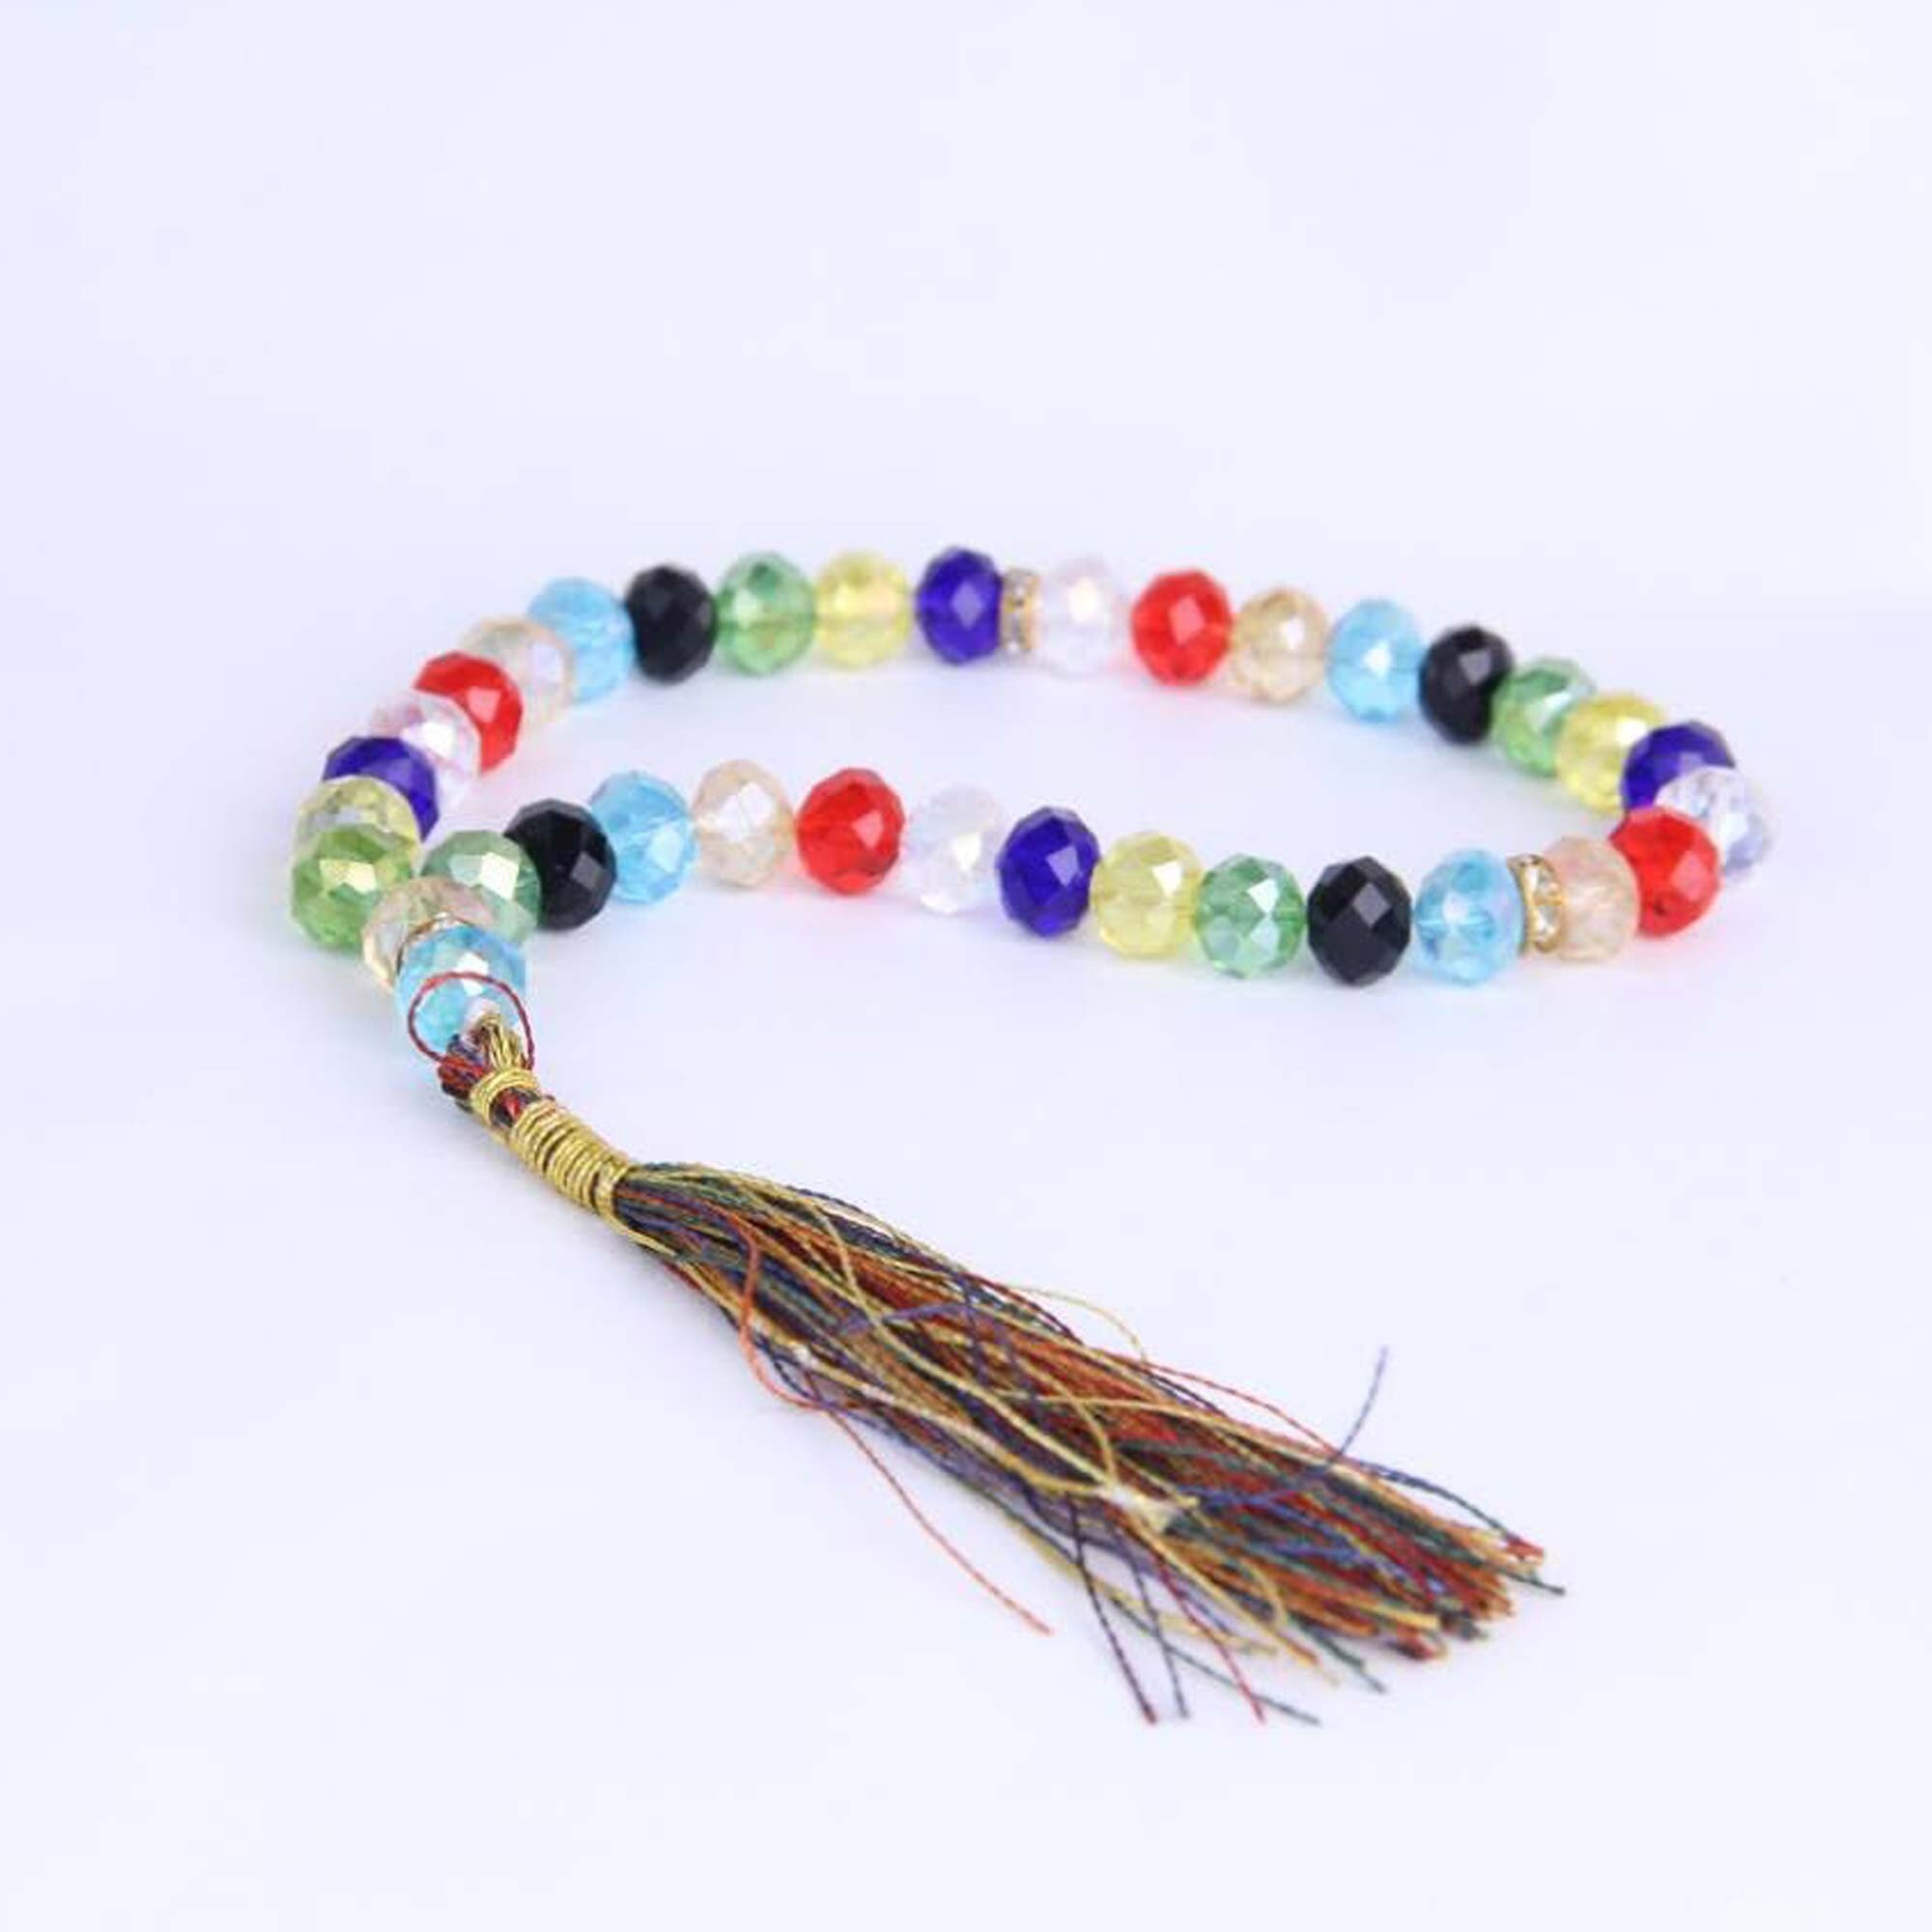 33 Mixed Beads Assorted Colors and Styles